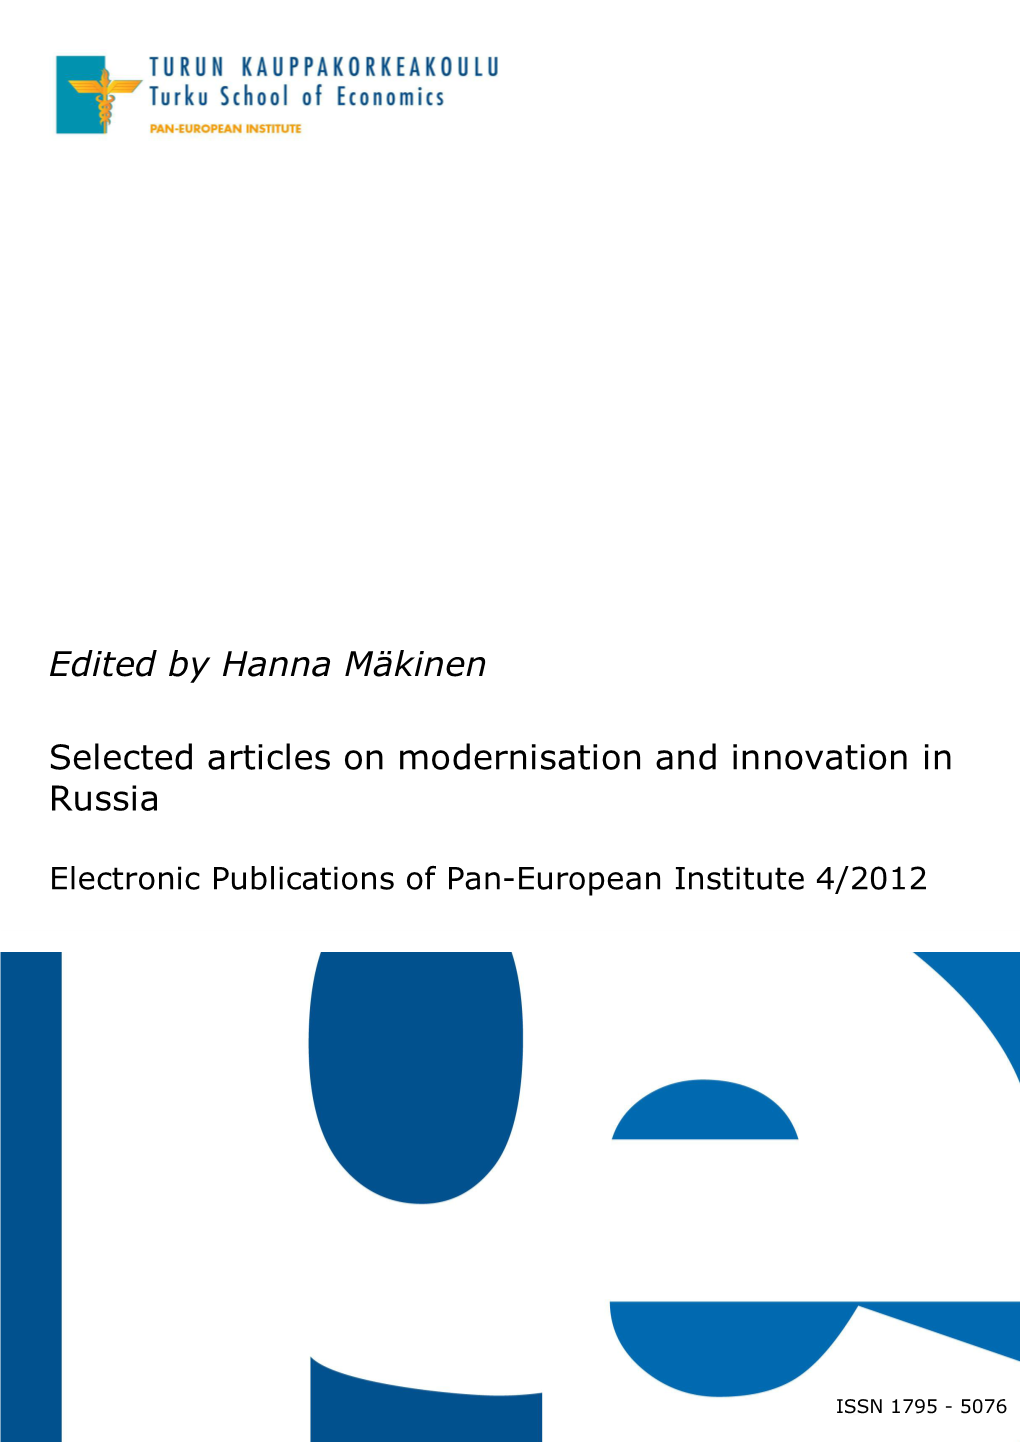 Selected Articles on Modernisation and Innovation in Russia (4/2012)